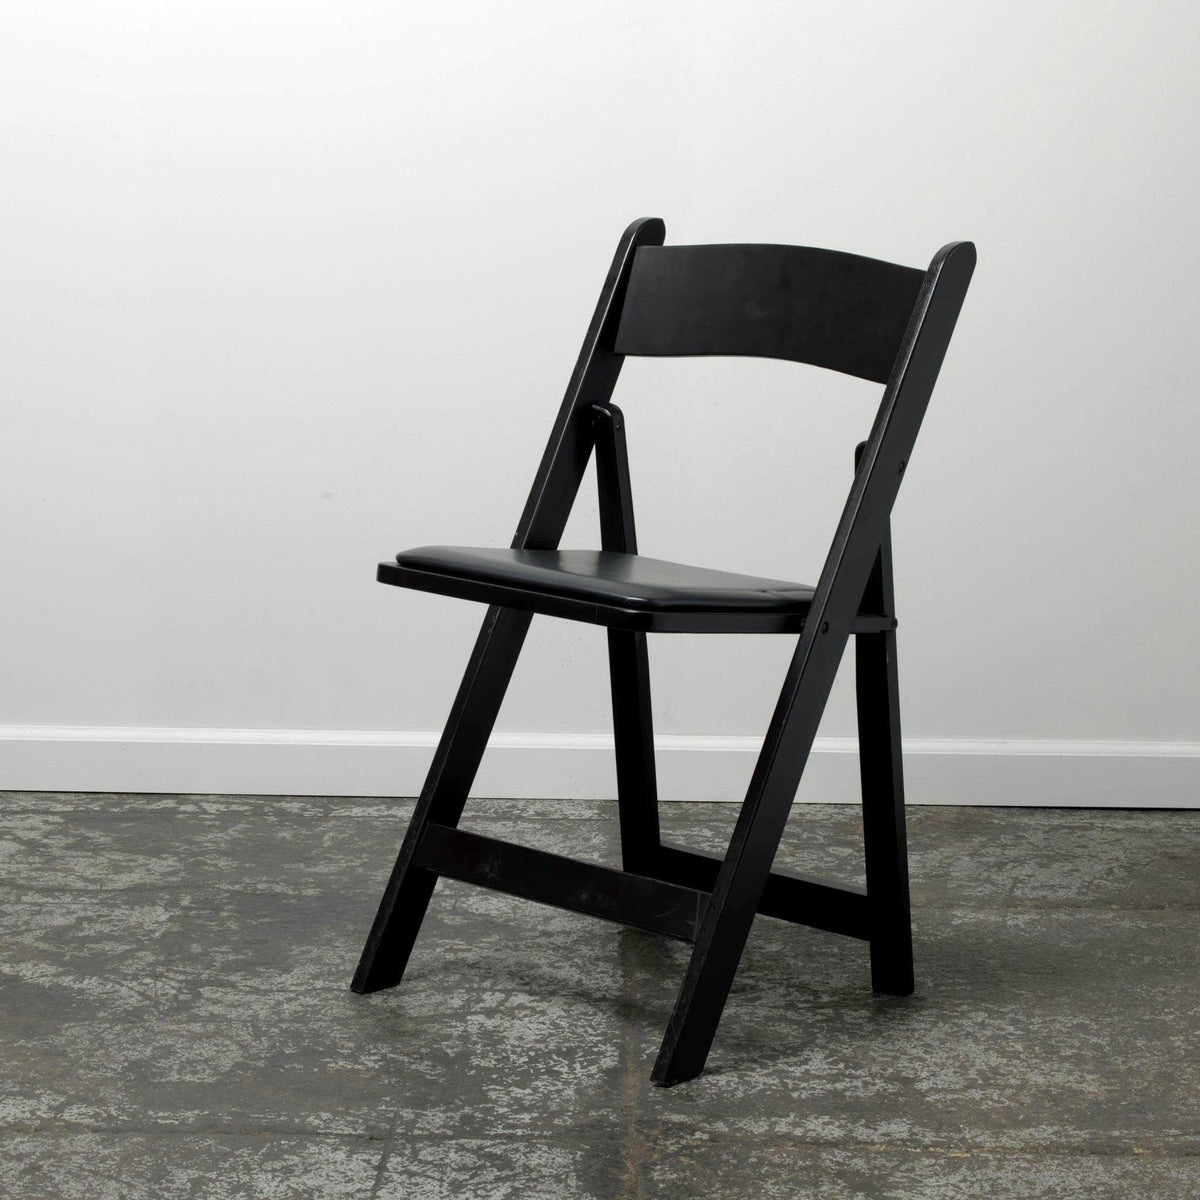 Black Wooden Folding Chair with Padded Seat